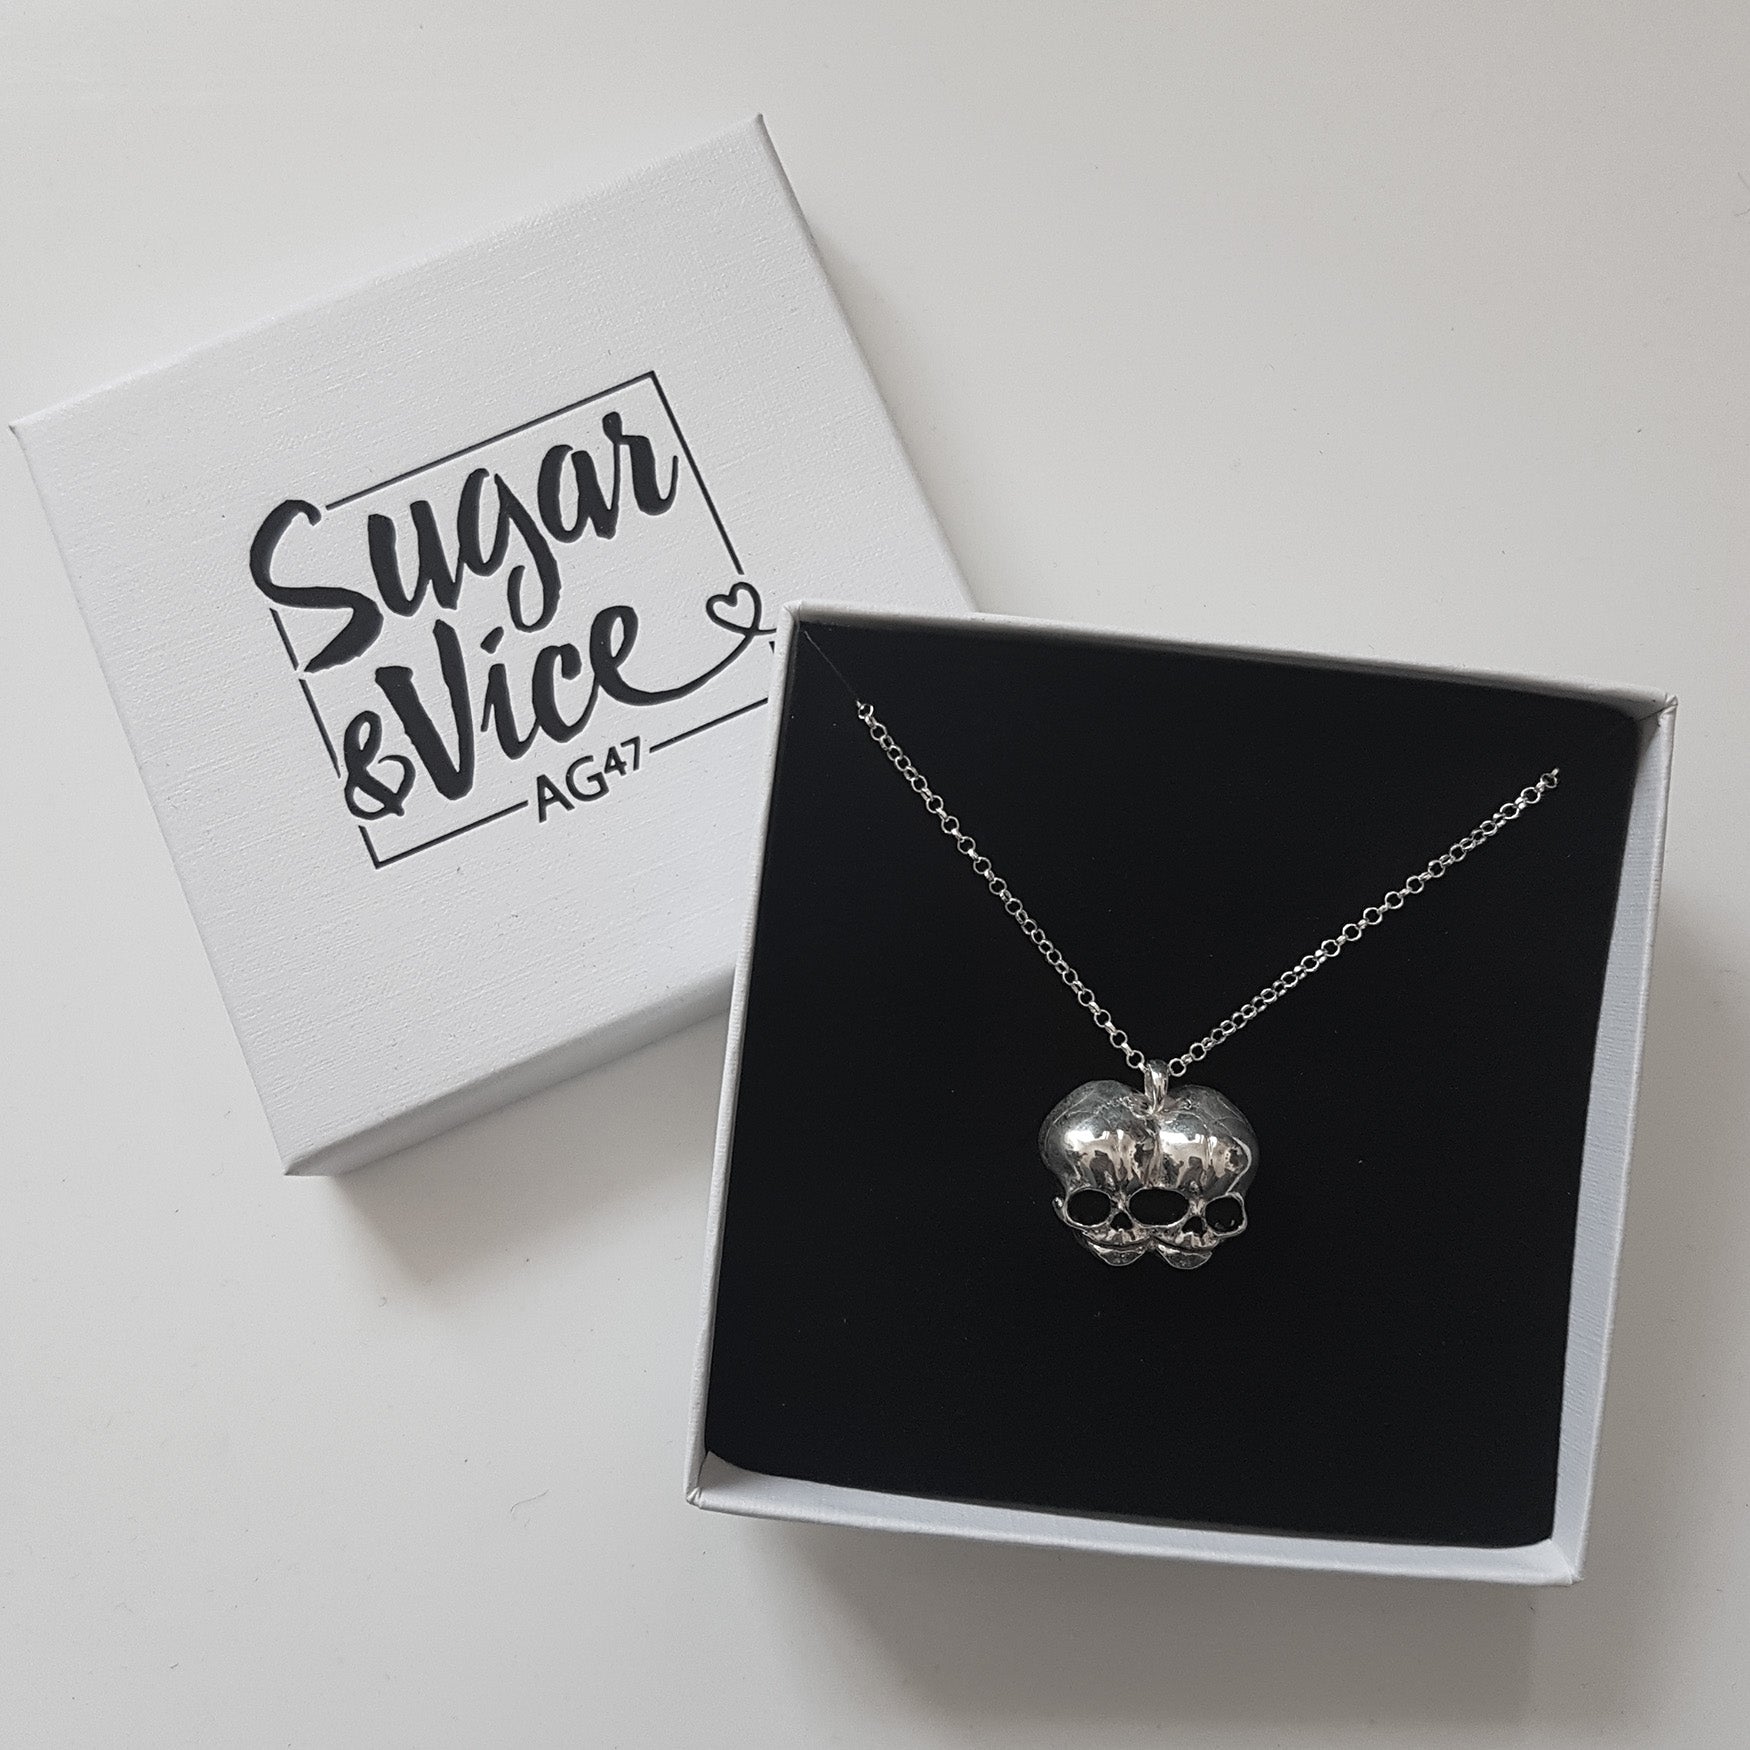 Sugar & Vice AG47 Conjoined Skull Necklace